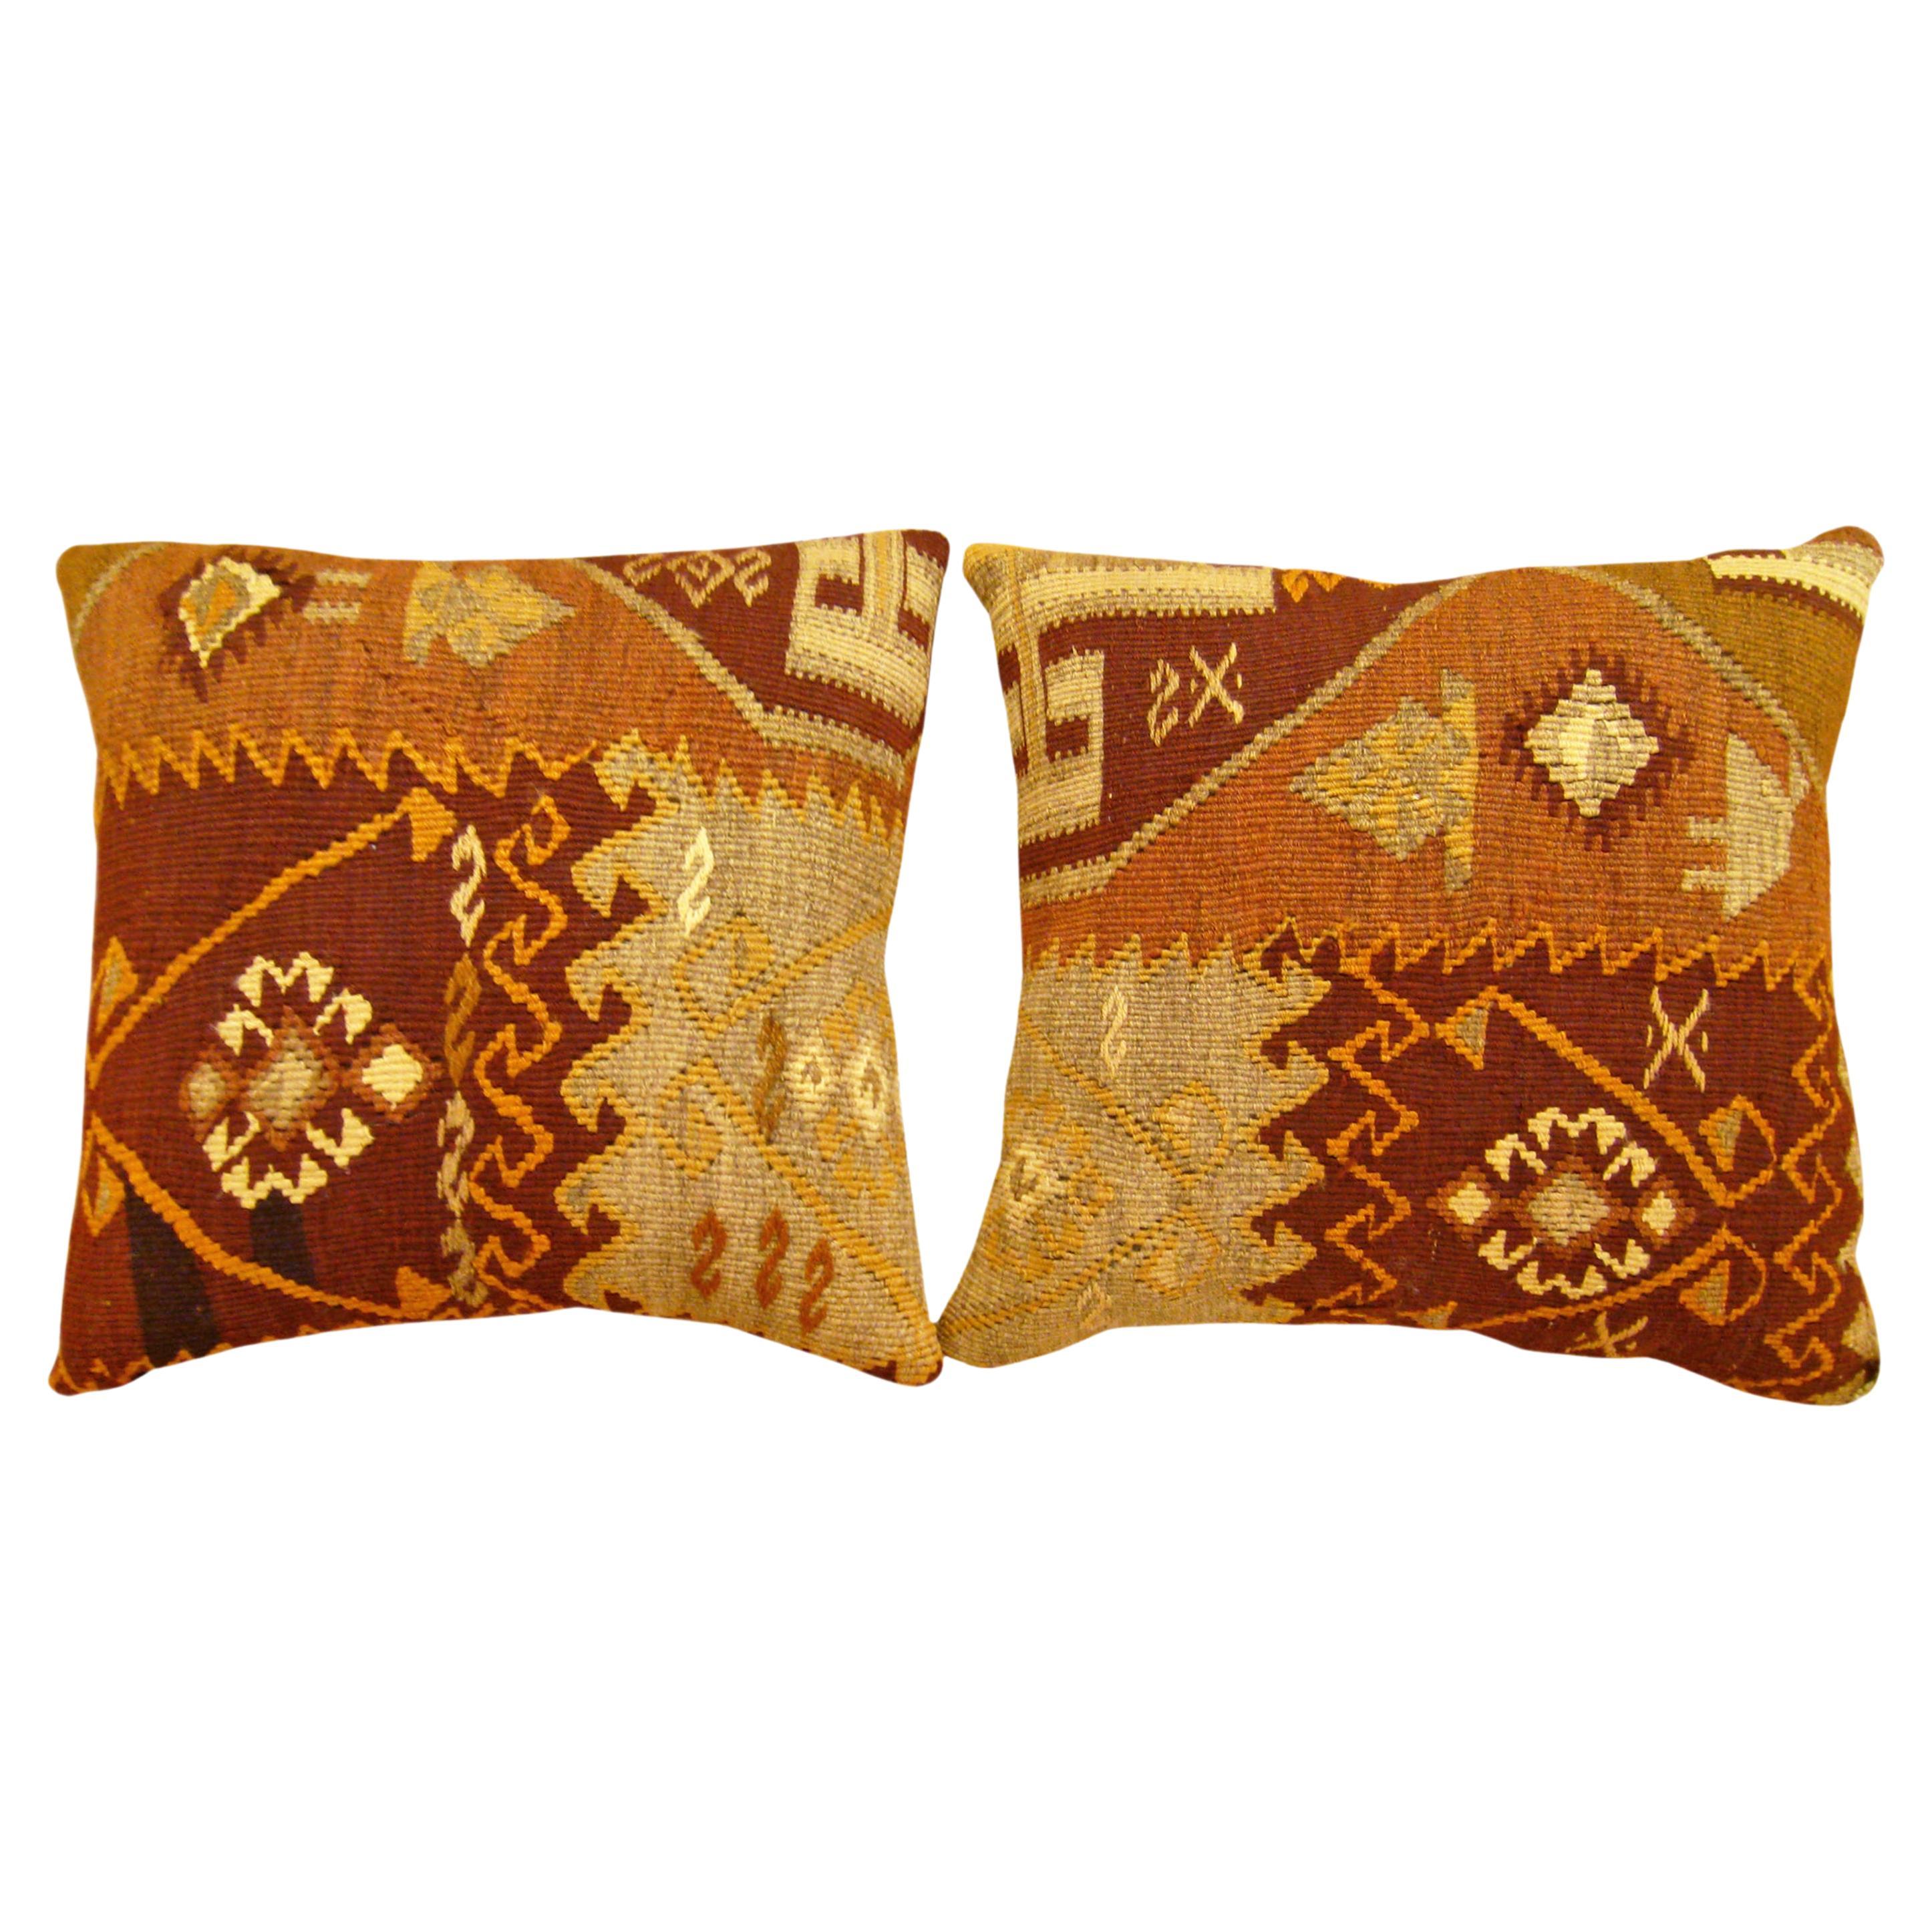 Pair of Decorative Vintage Turkish Kilim Rug Pillows with Geometric Abstracts For Sale